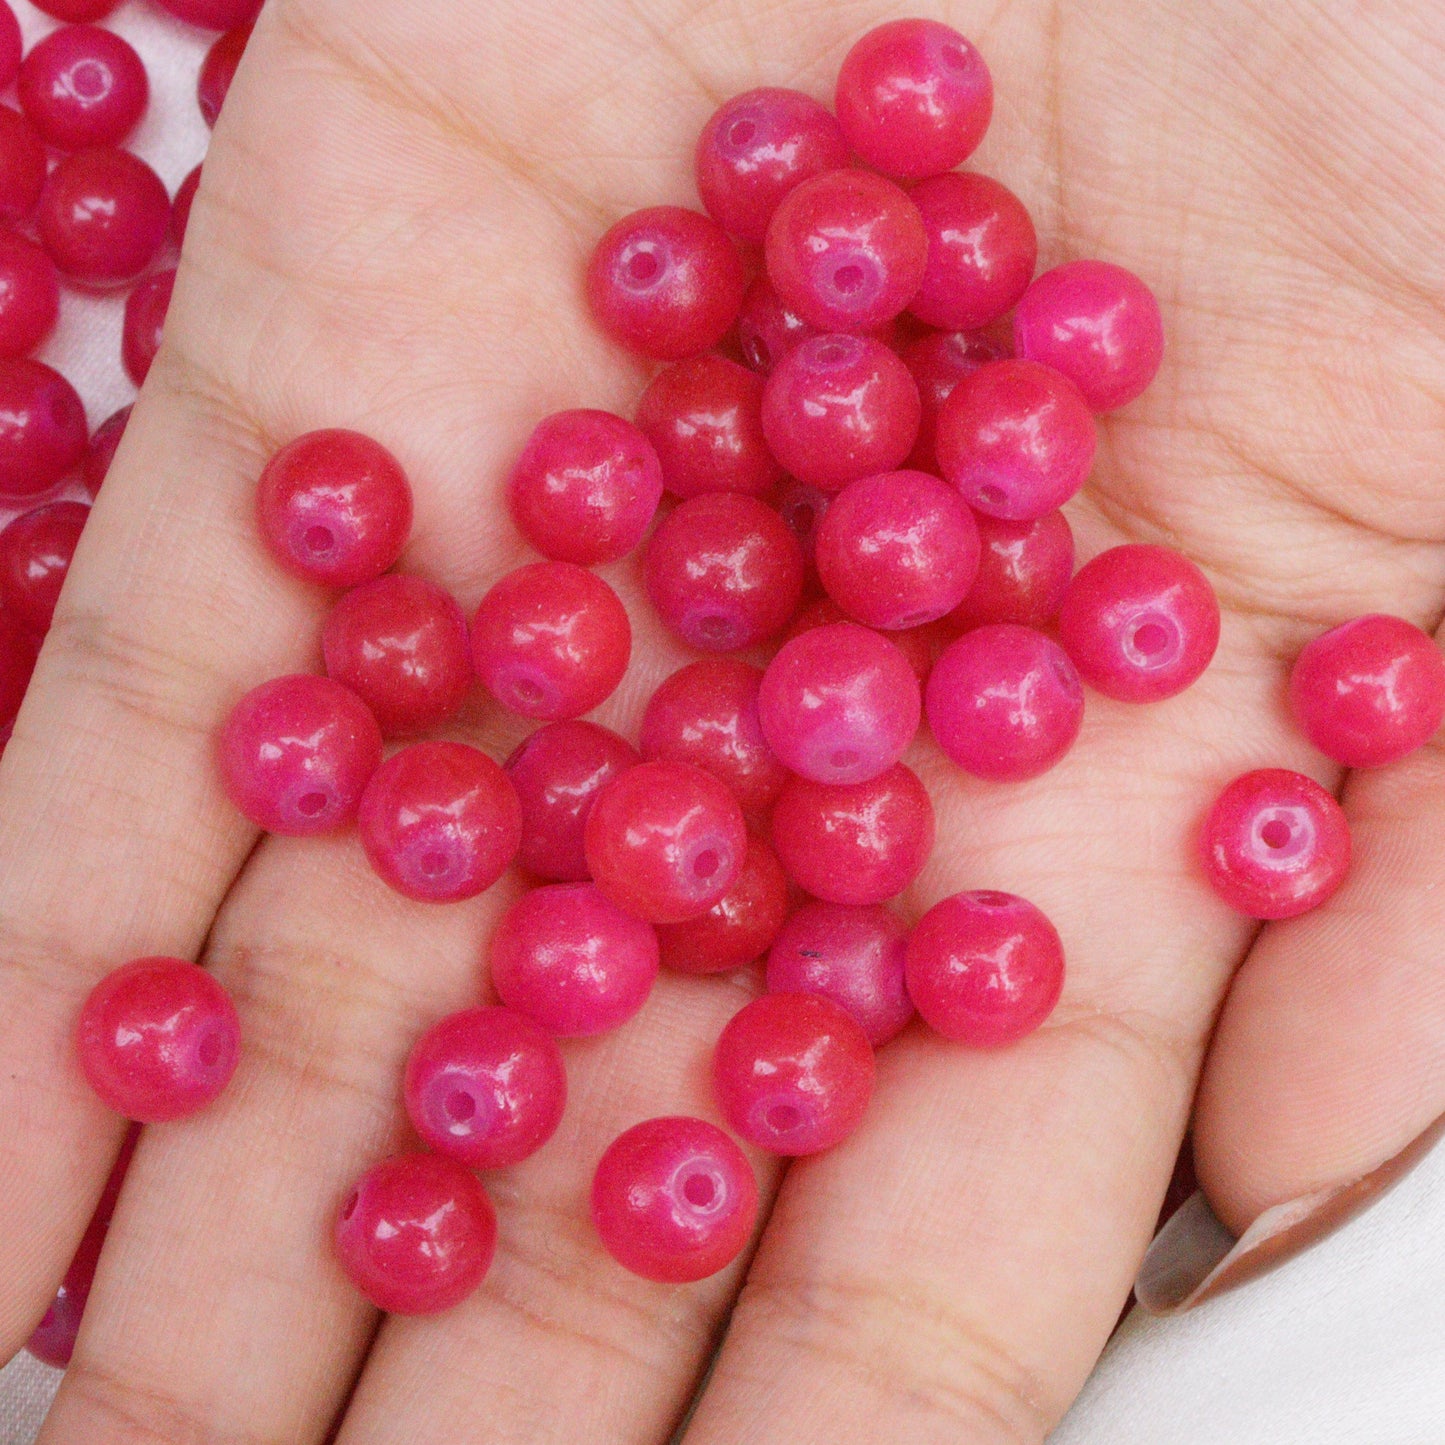 Glass Beads Dark Pink 8mm Round for Jewelry Making, 500gm approx. 800 beads